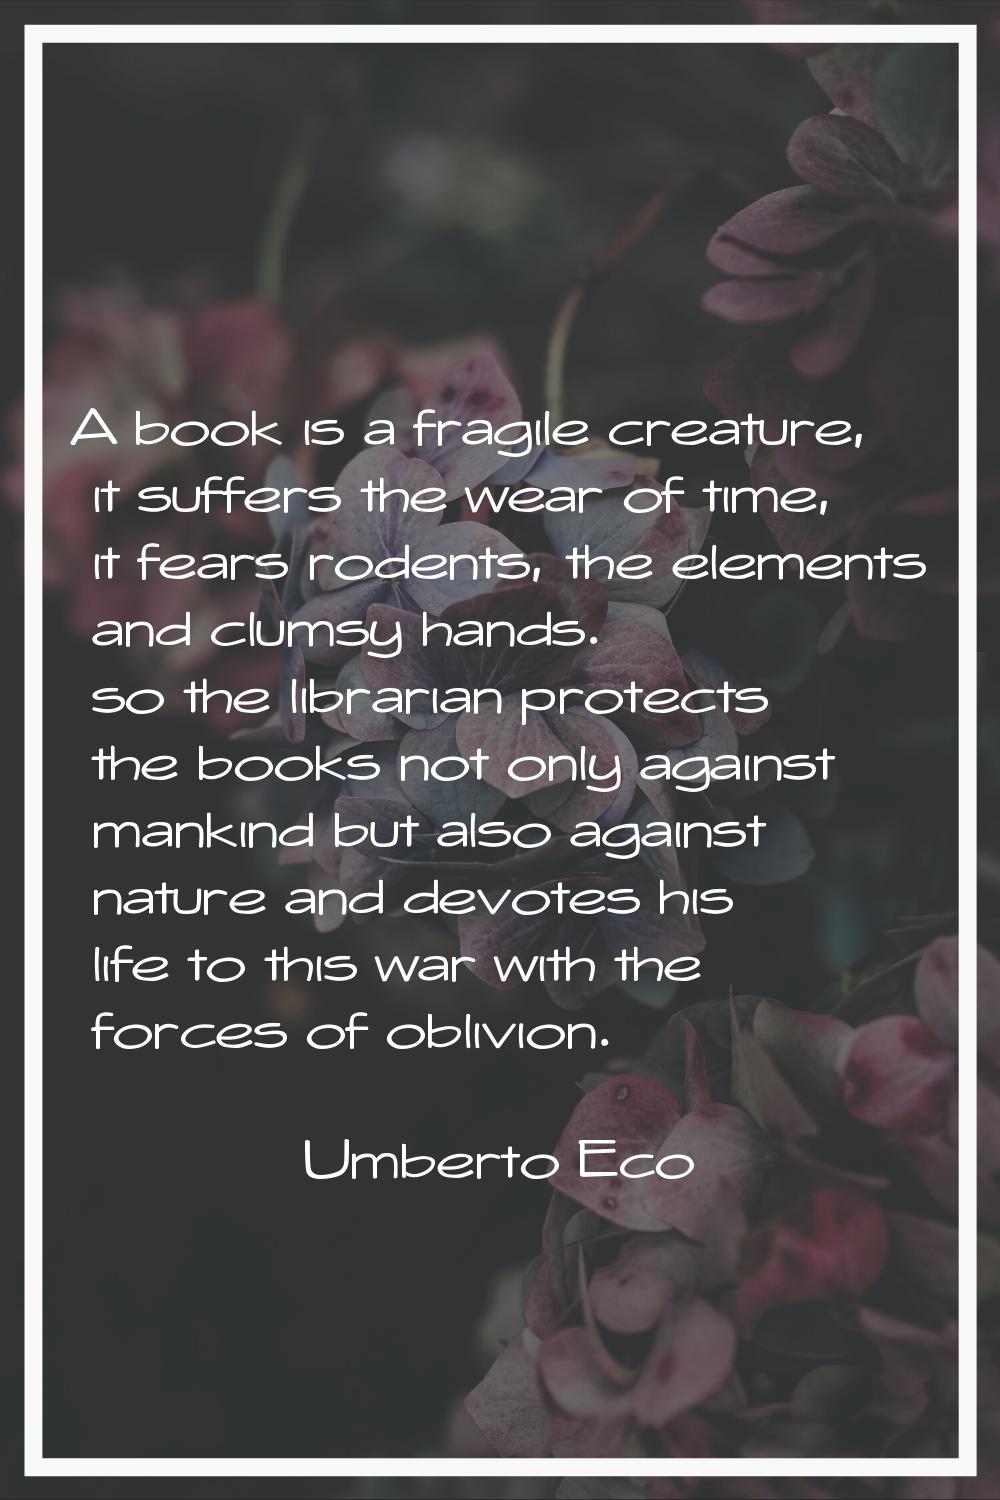 A book is a fragile creature, it suffers the wear of time, it fears rodents, the elements and clums